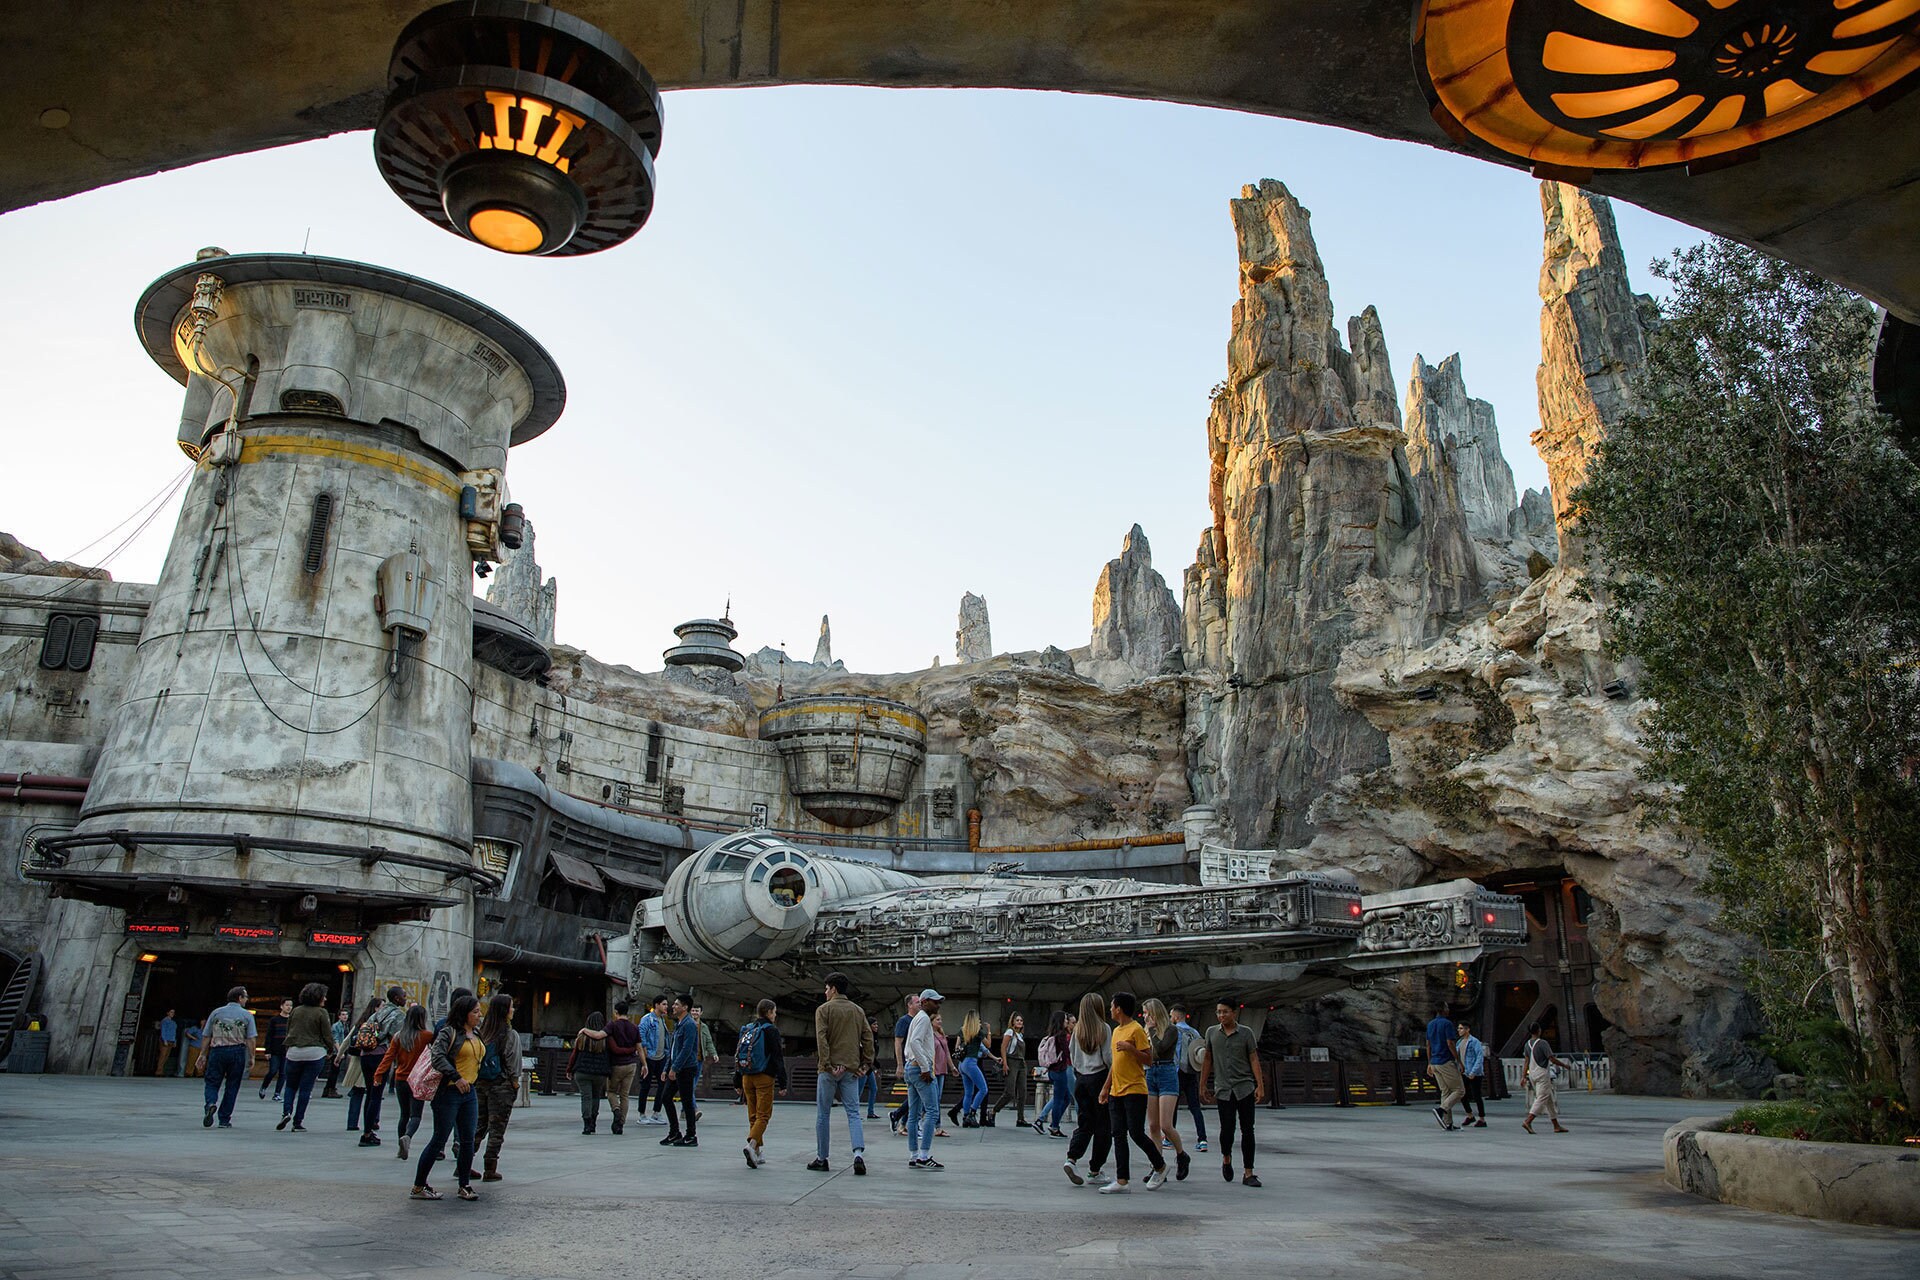 At Black Spire Outpost, a village on the planet of Batuu, Guests will discover two signature attr...